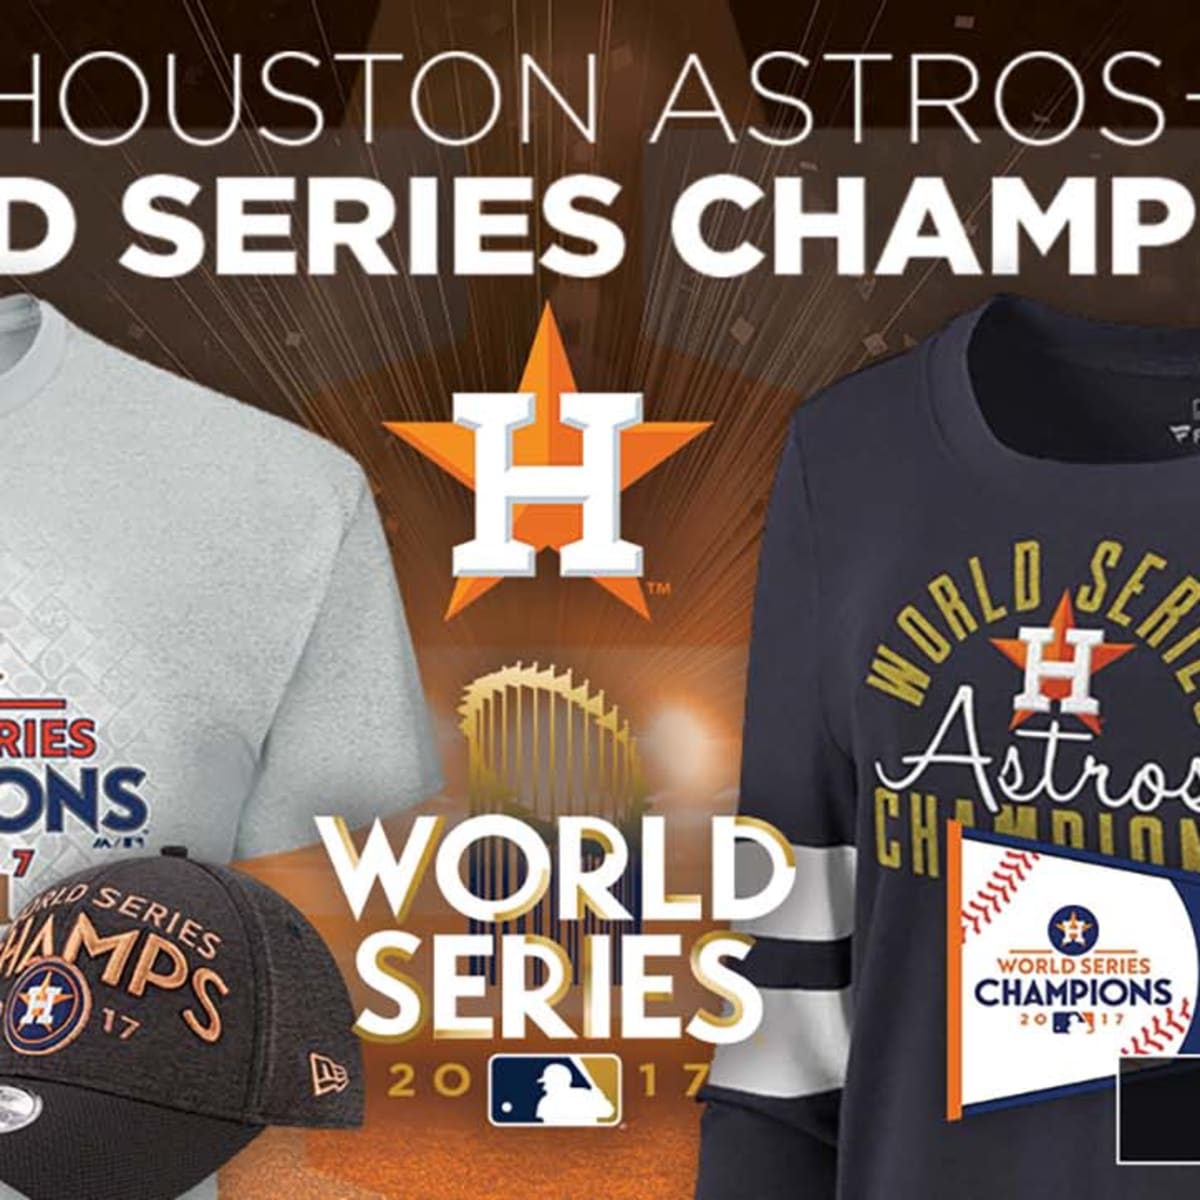 Houston Astros World Series Champions Gear, Autographs, Buying Guide